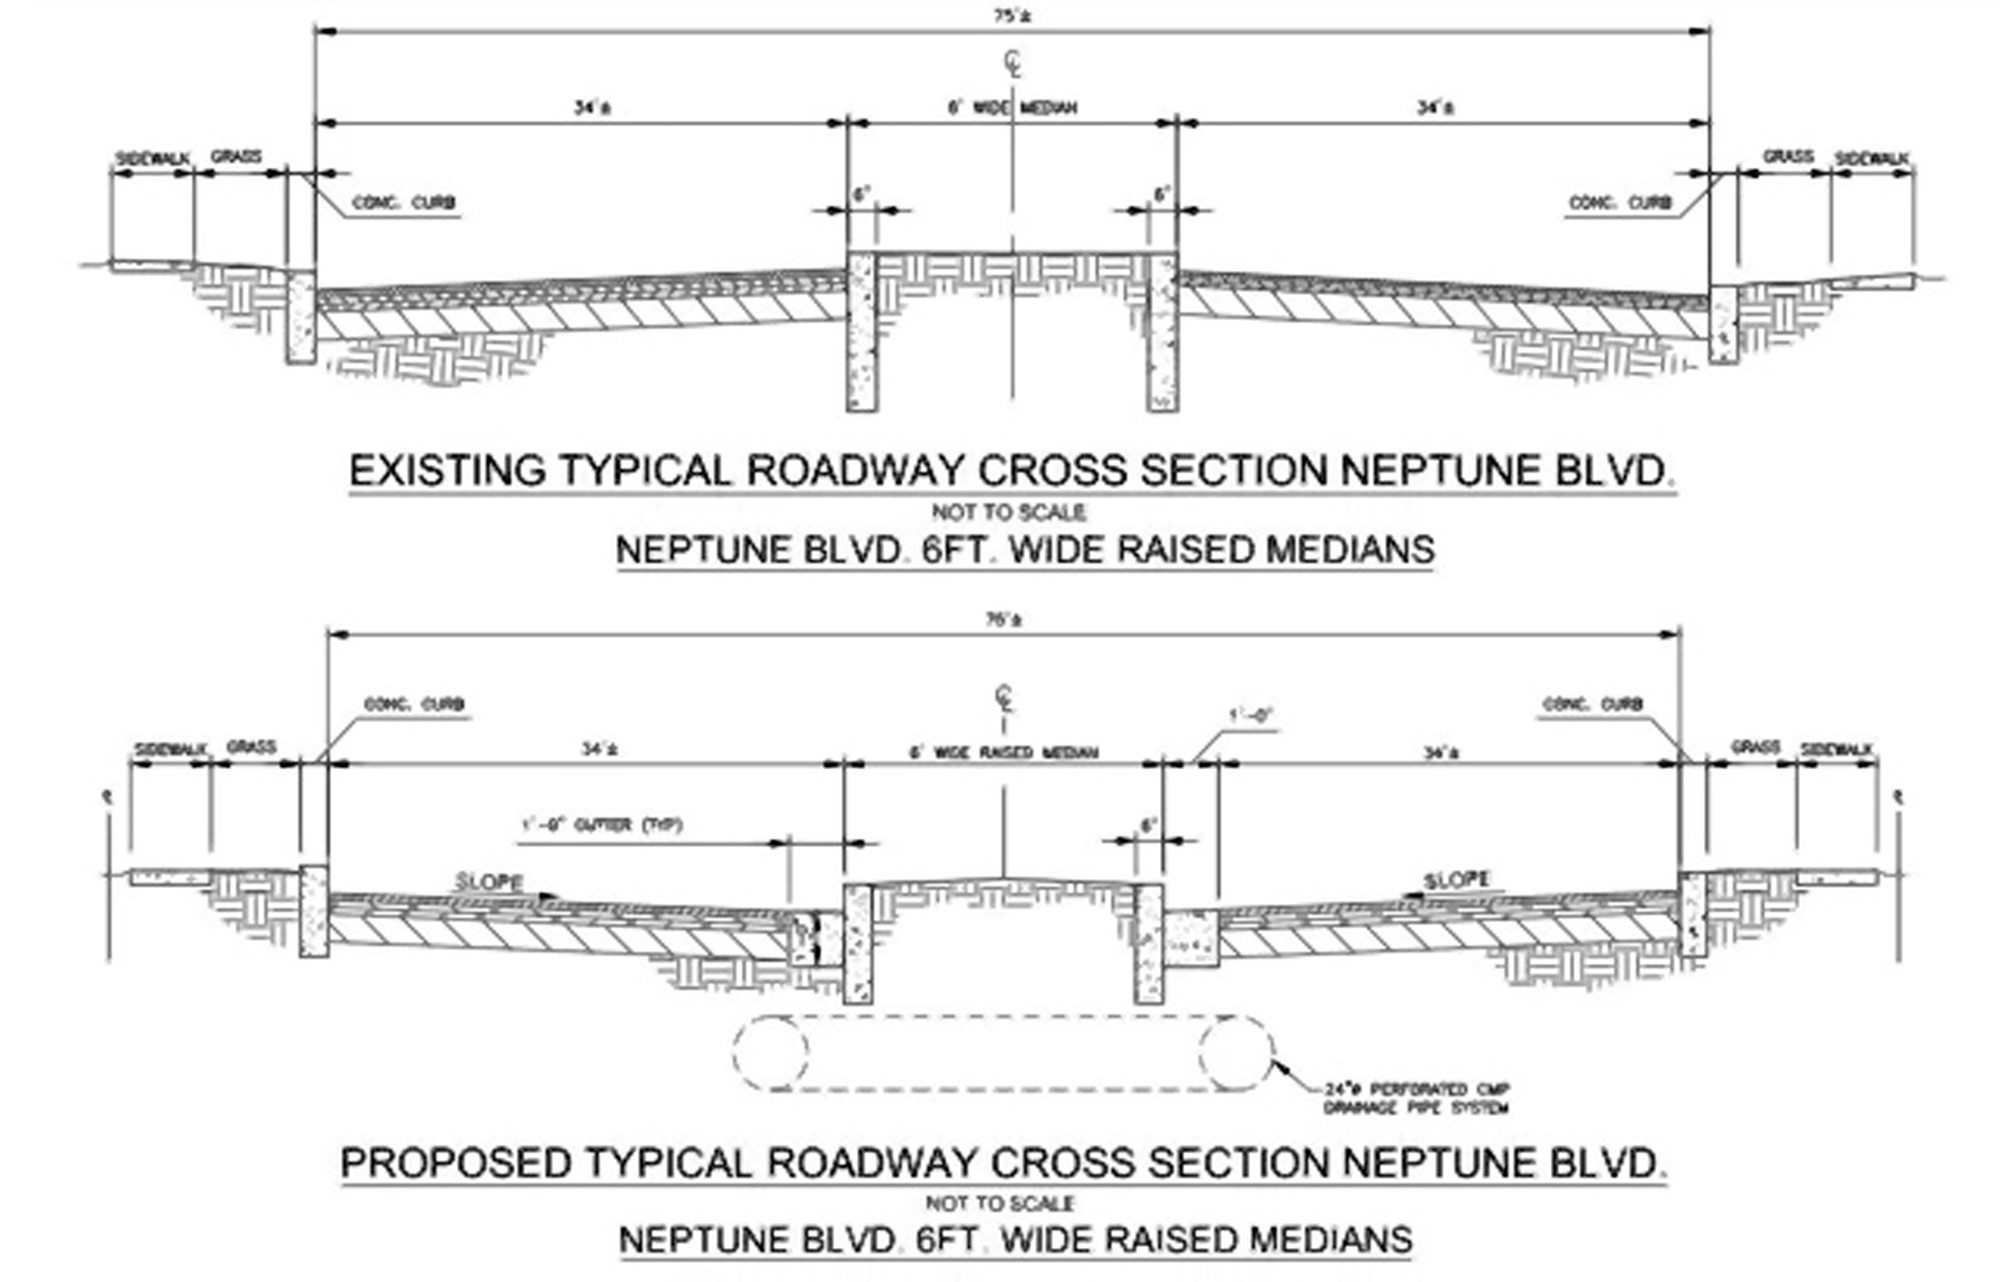 Artists’ renderings comparing the current design of Neptune Boulevard with the planned addition of retention chambers that would mitigate flooding by storing storm water.